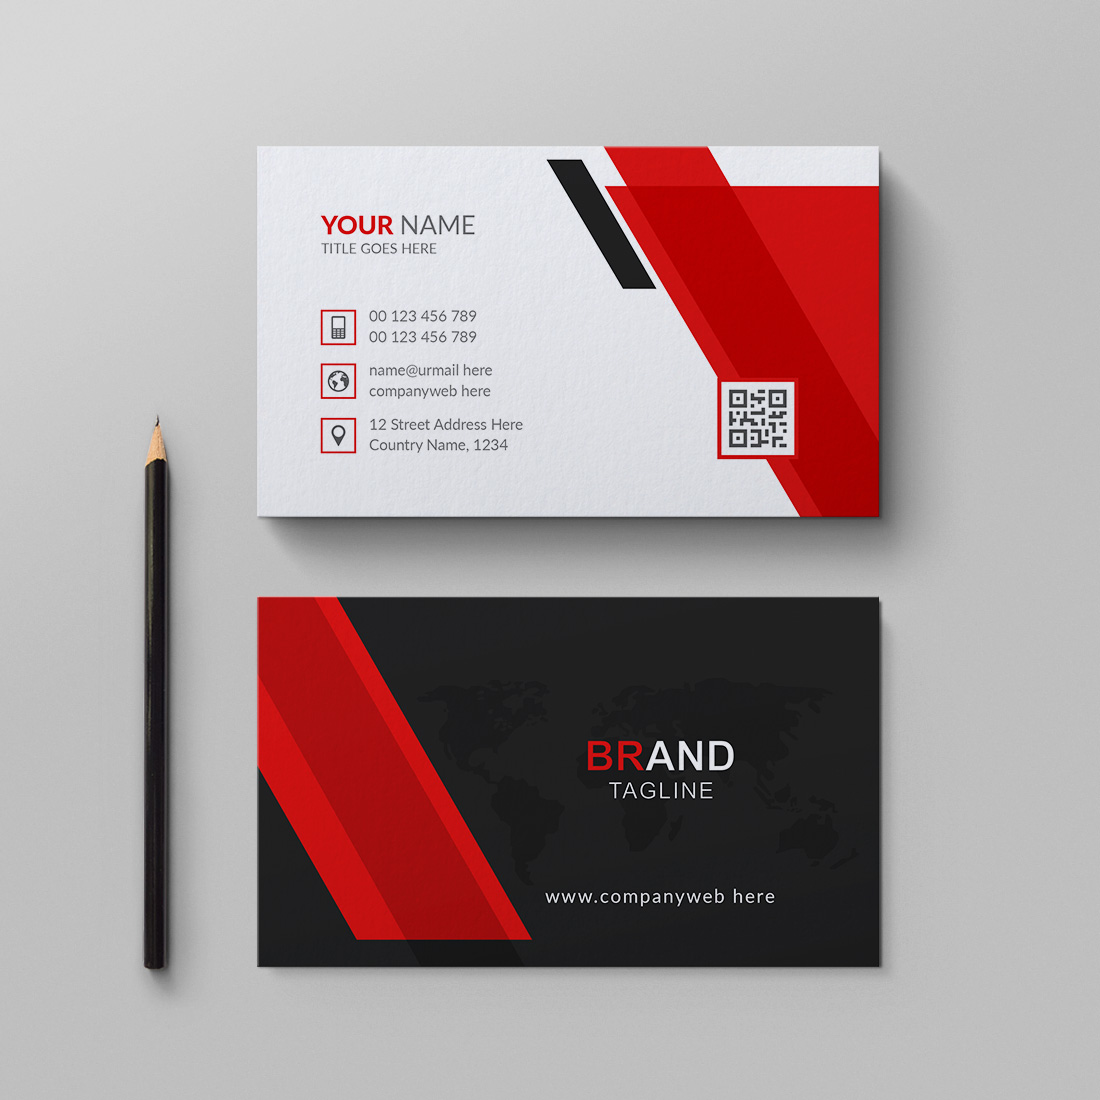 Red and black business card design cover image.